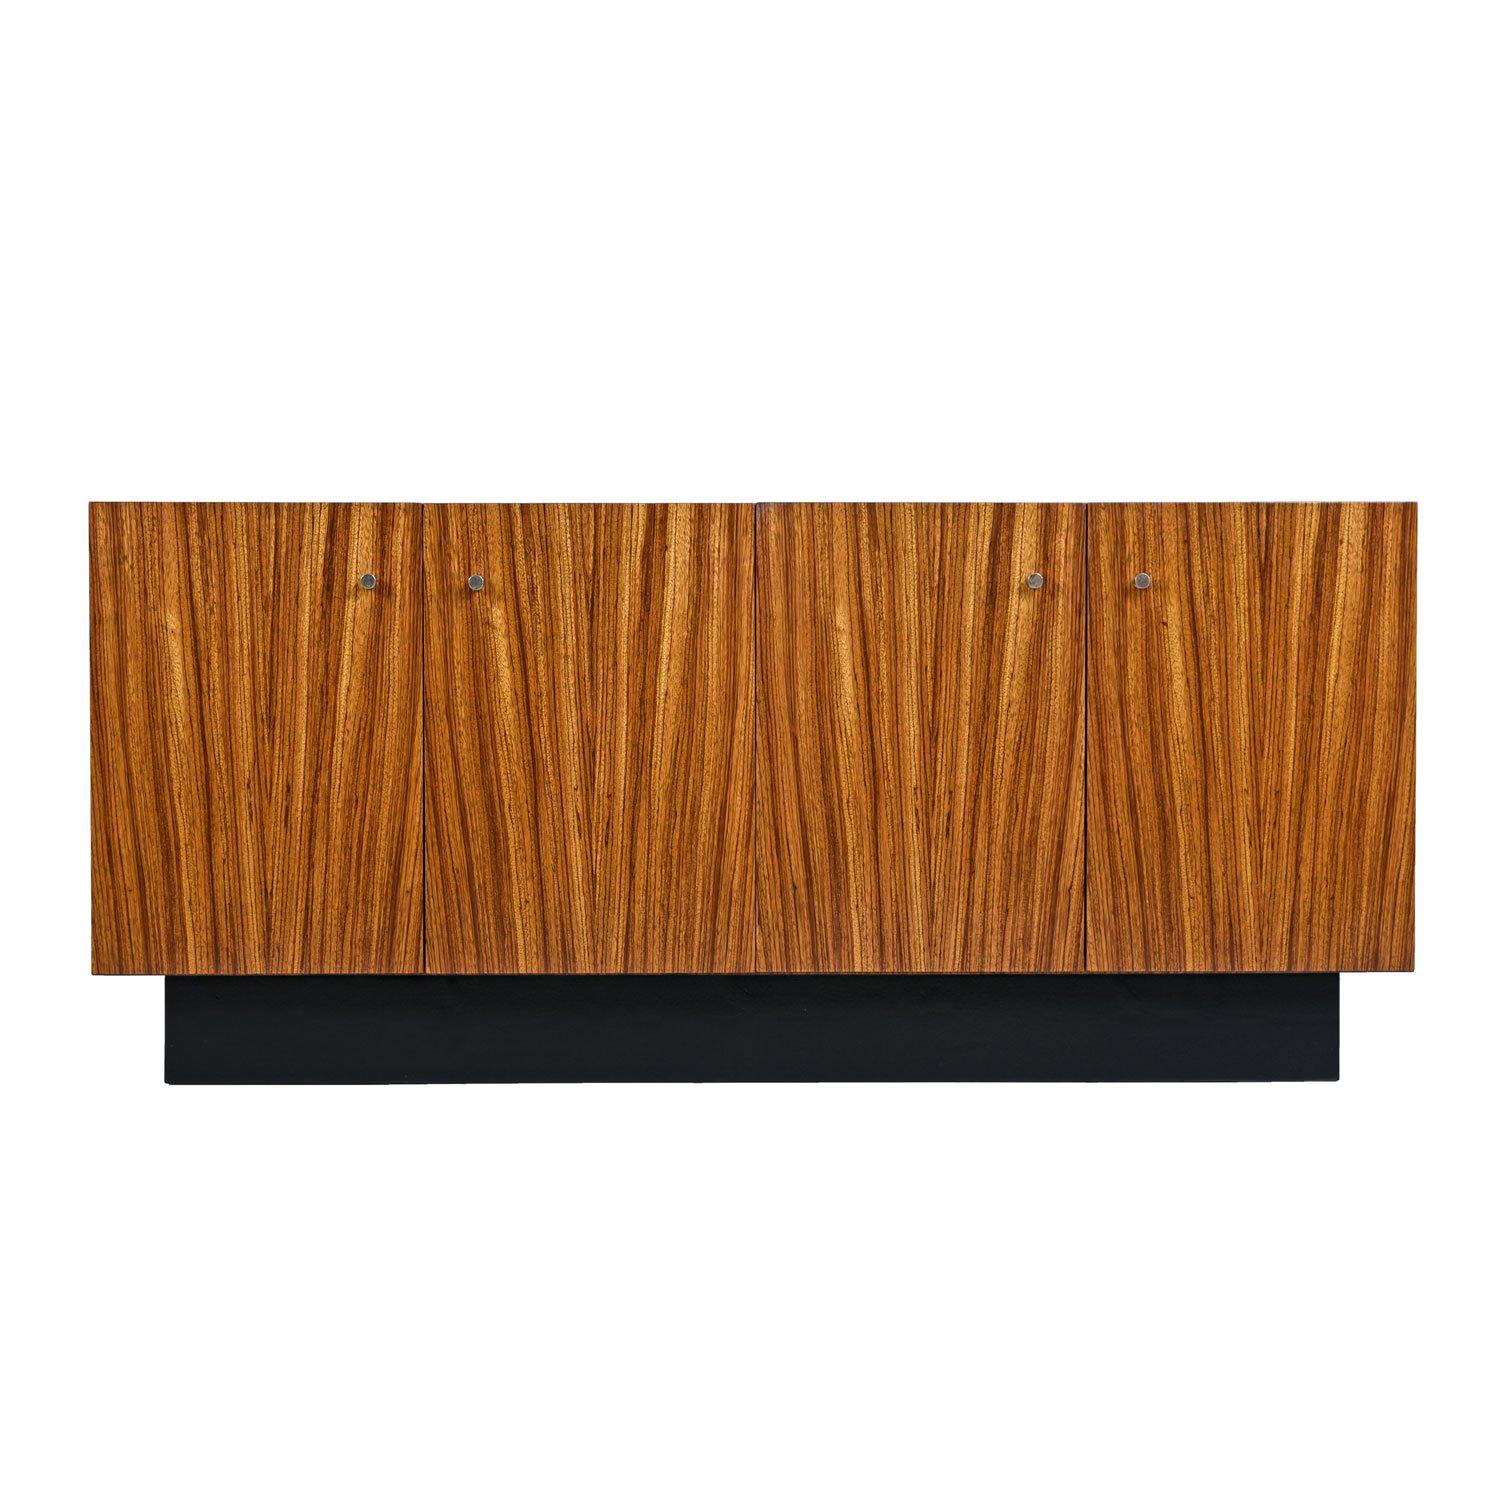 Brilliant simplicity and captivating exotic materials intersect on this Milo Baughman credenza. Made by Thayer Coggin, circa 1970s. The spare form rejects decorative embellishments, allowing the zebra wood veneer to dazzle the eye. The cabinet sits